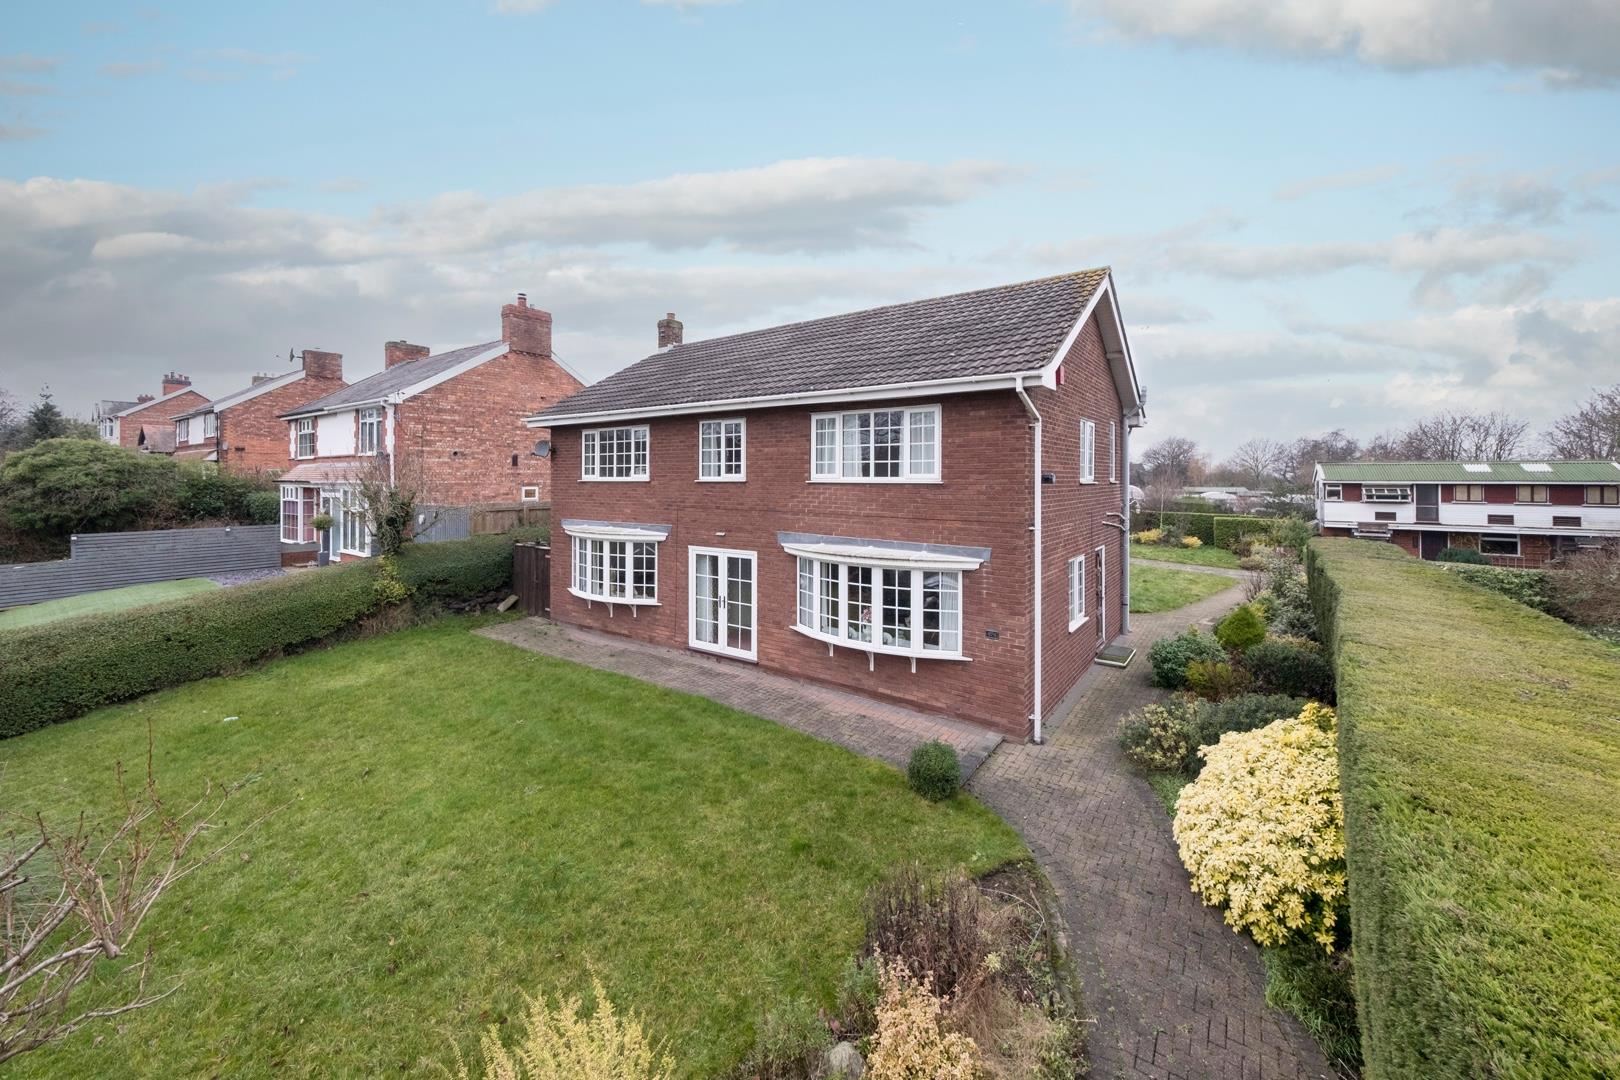 3 bedroom  Detached House for Sale in Winsford